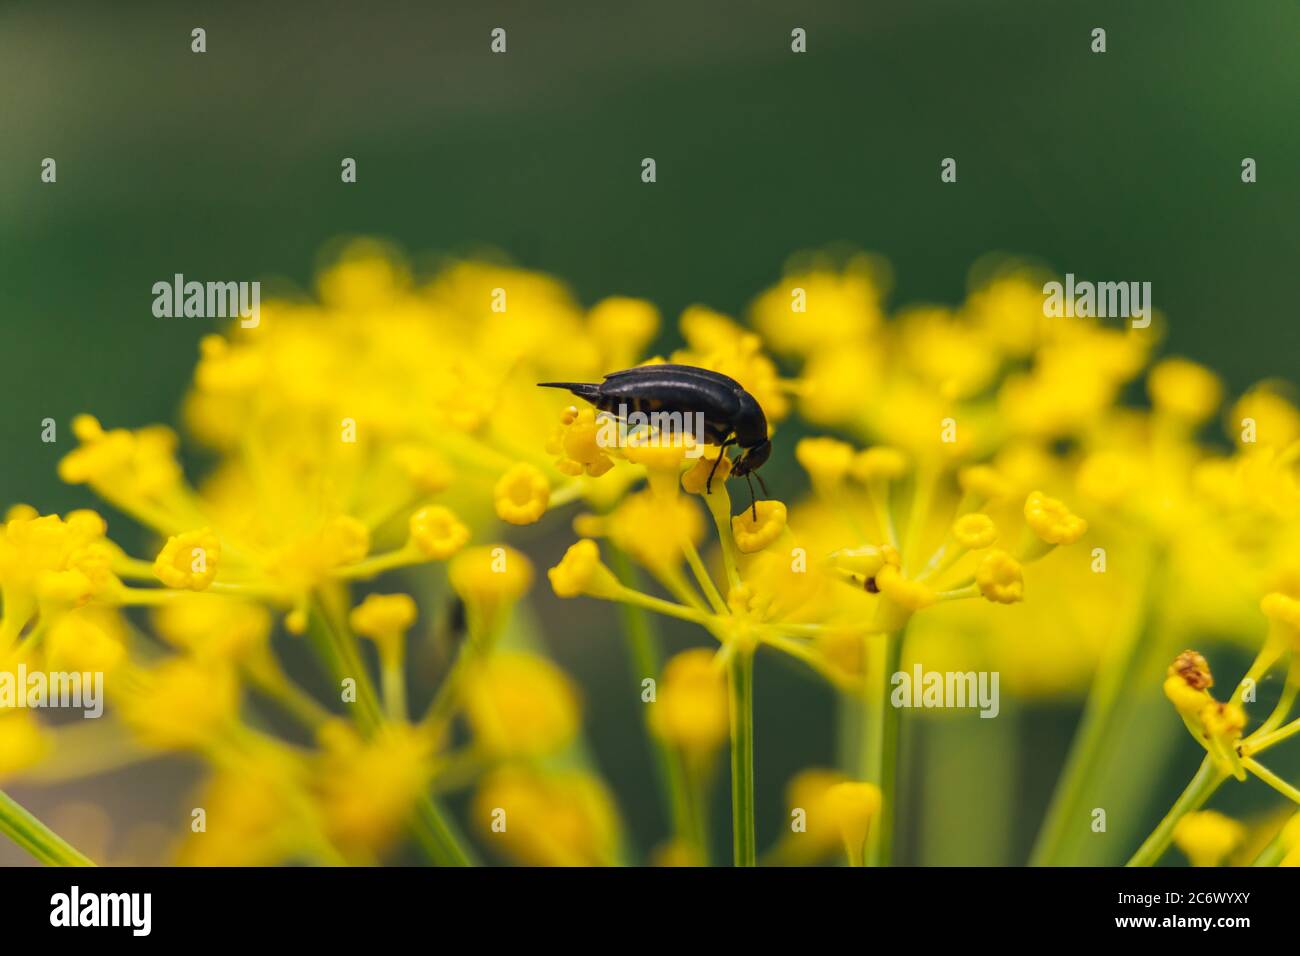 Very small insect on a flower macro shot Stock Photo